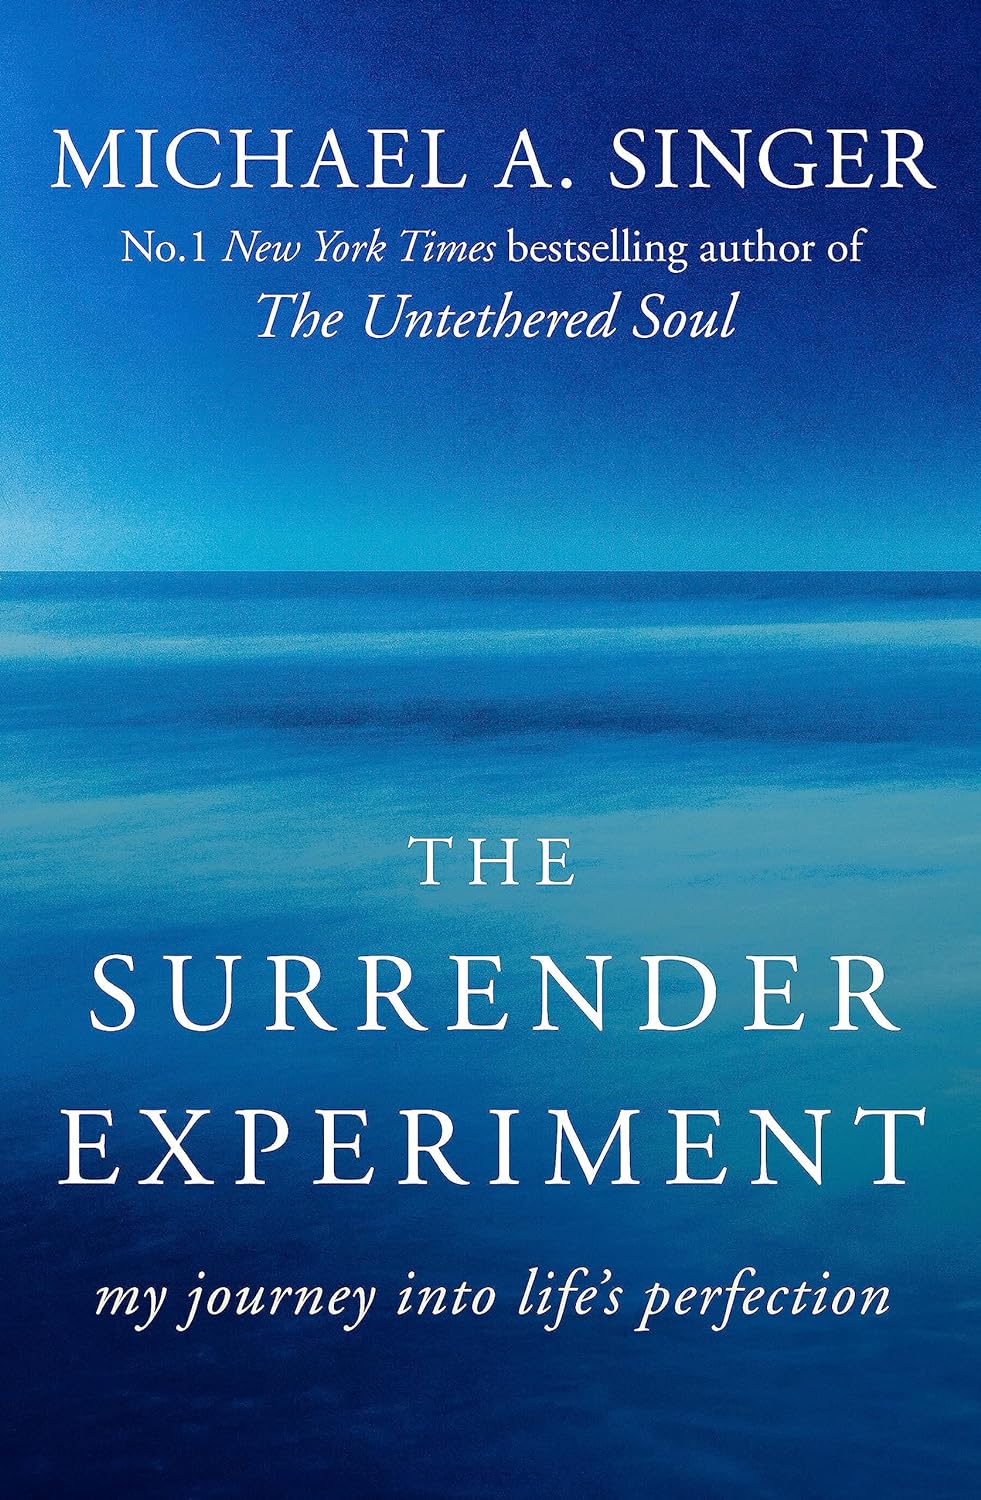 THE SURRENDER EXPERIMENT by Michael A. Singer